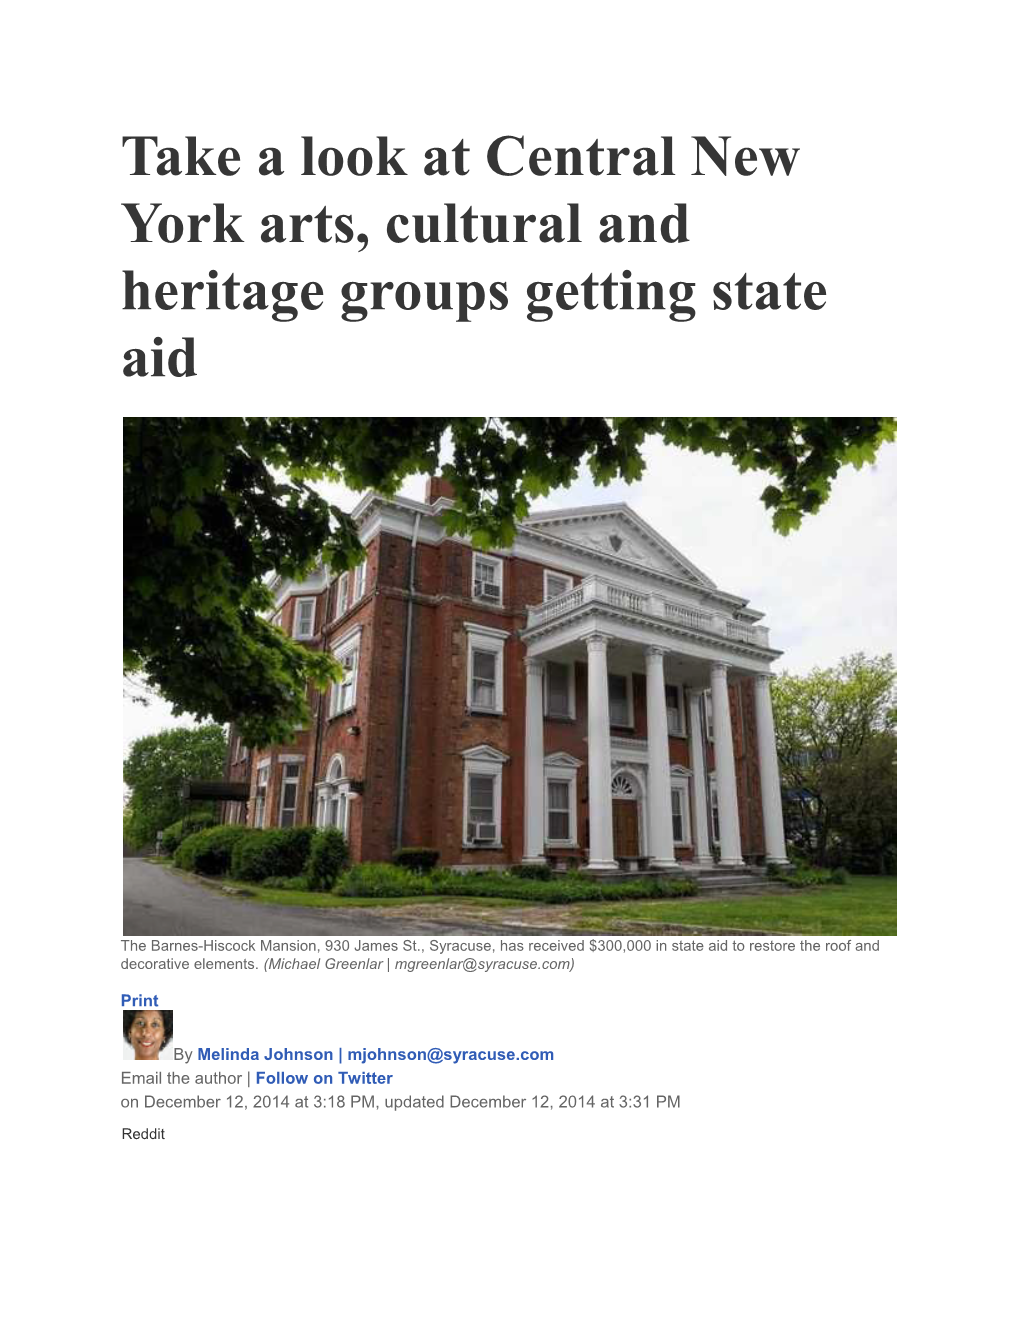 Take a Look at Central New York Arts, Cultural and Heritage Groups Getting State Aid